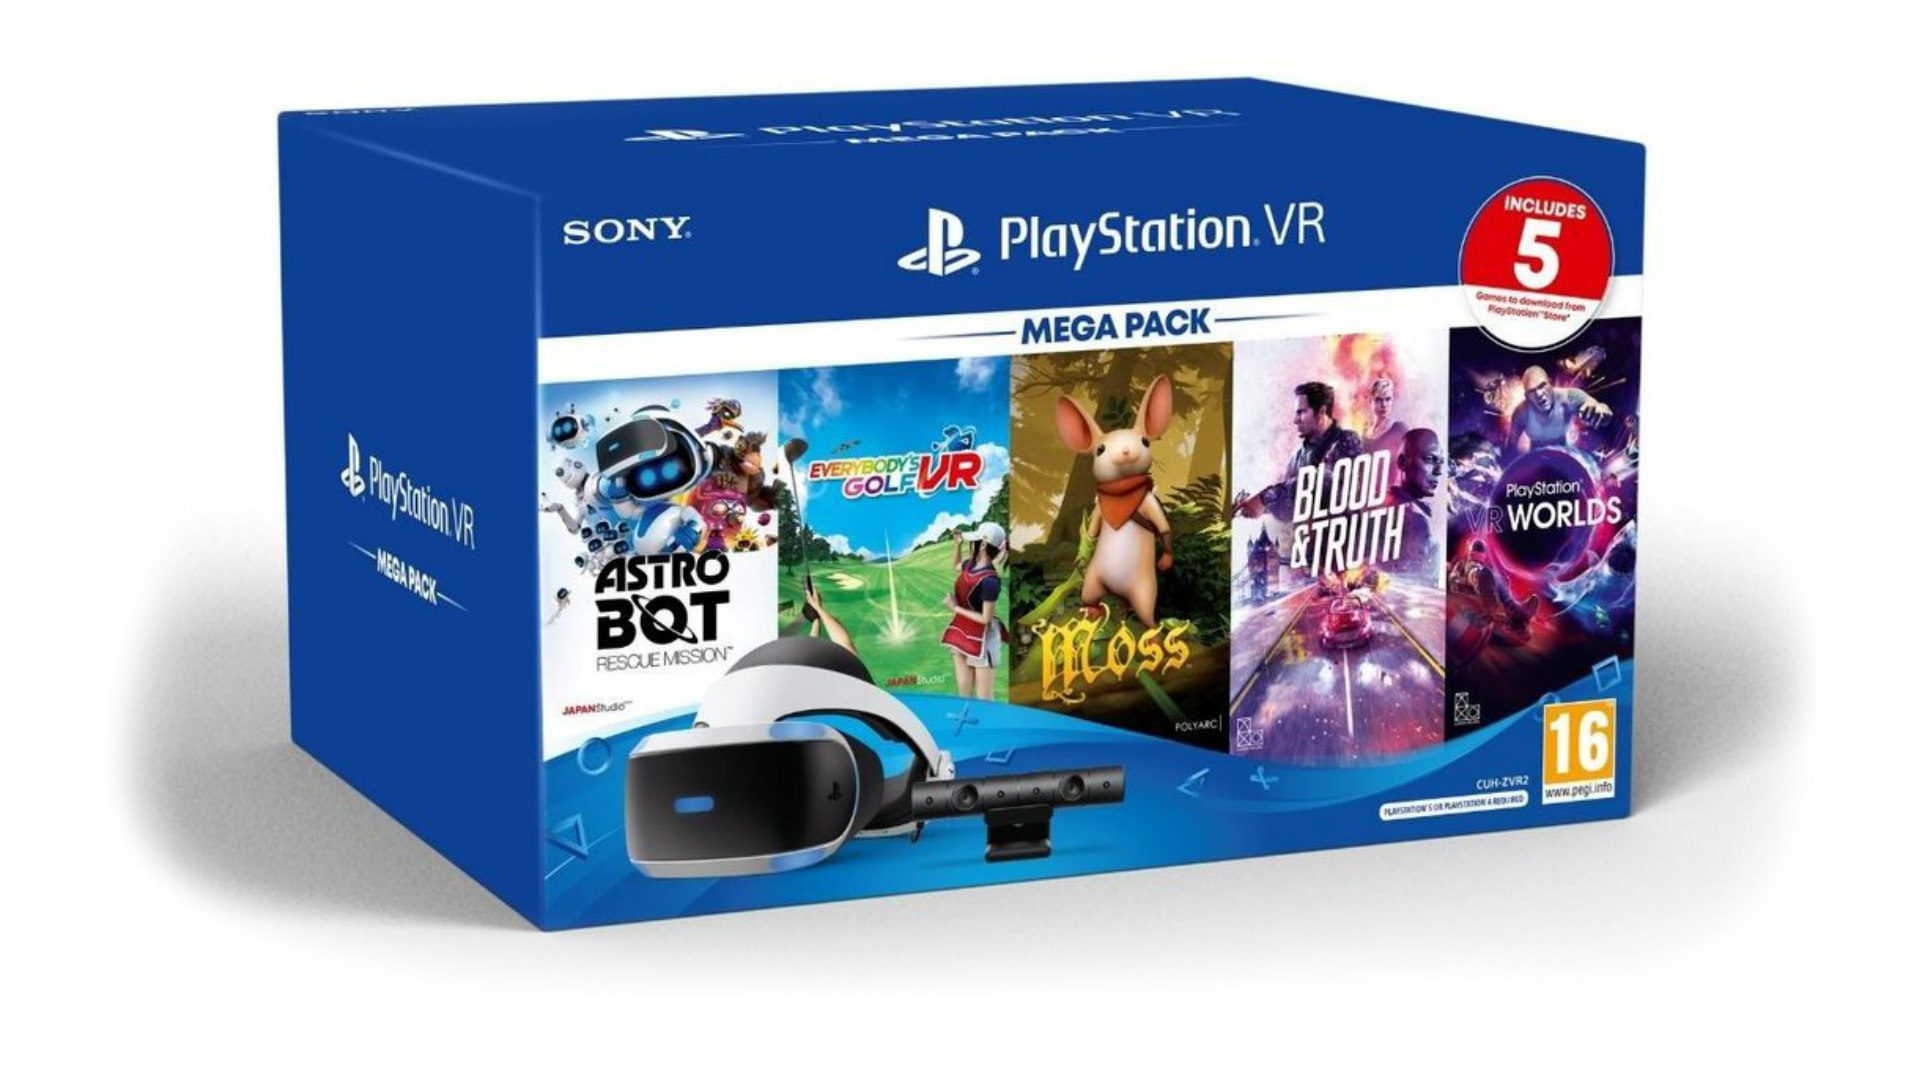 New PSVR Mega Pack for EU, Australia & New Zealand to Come with 5 Top